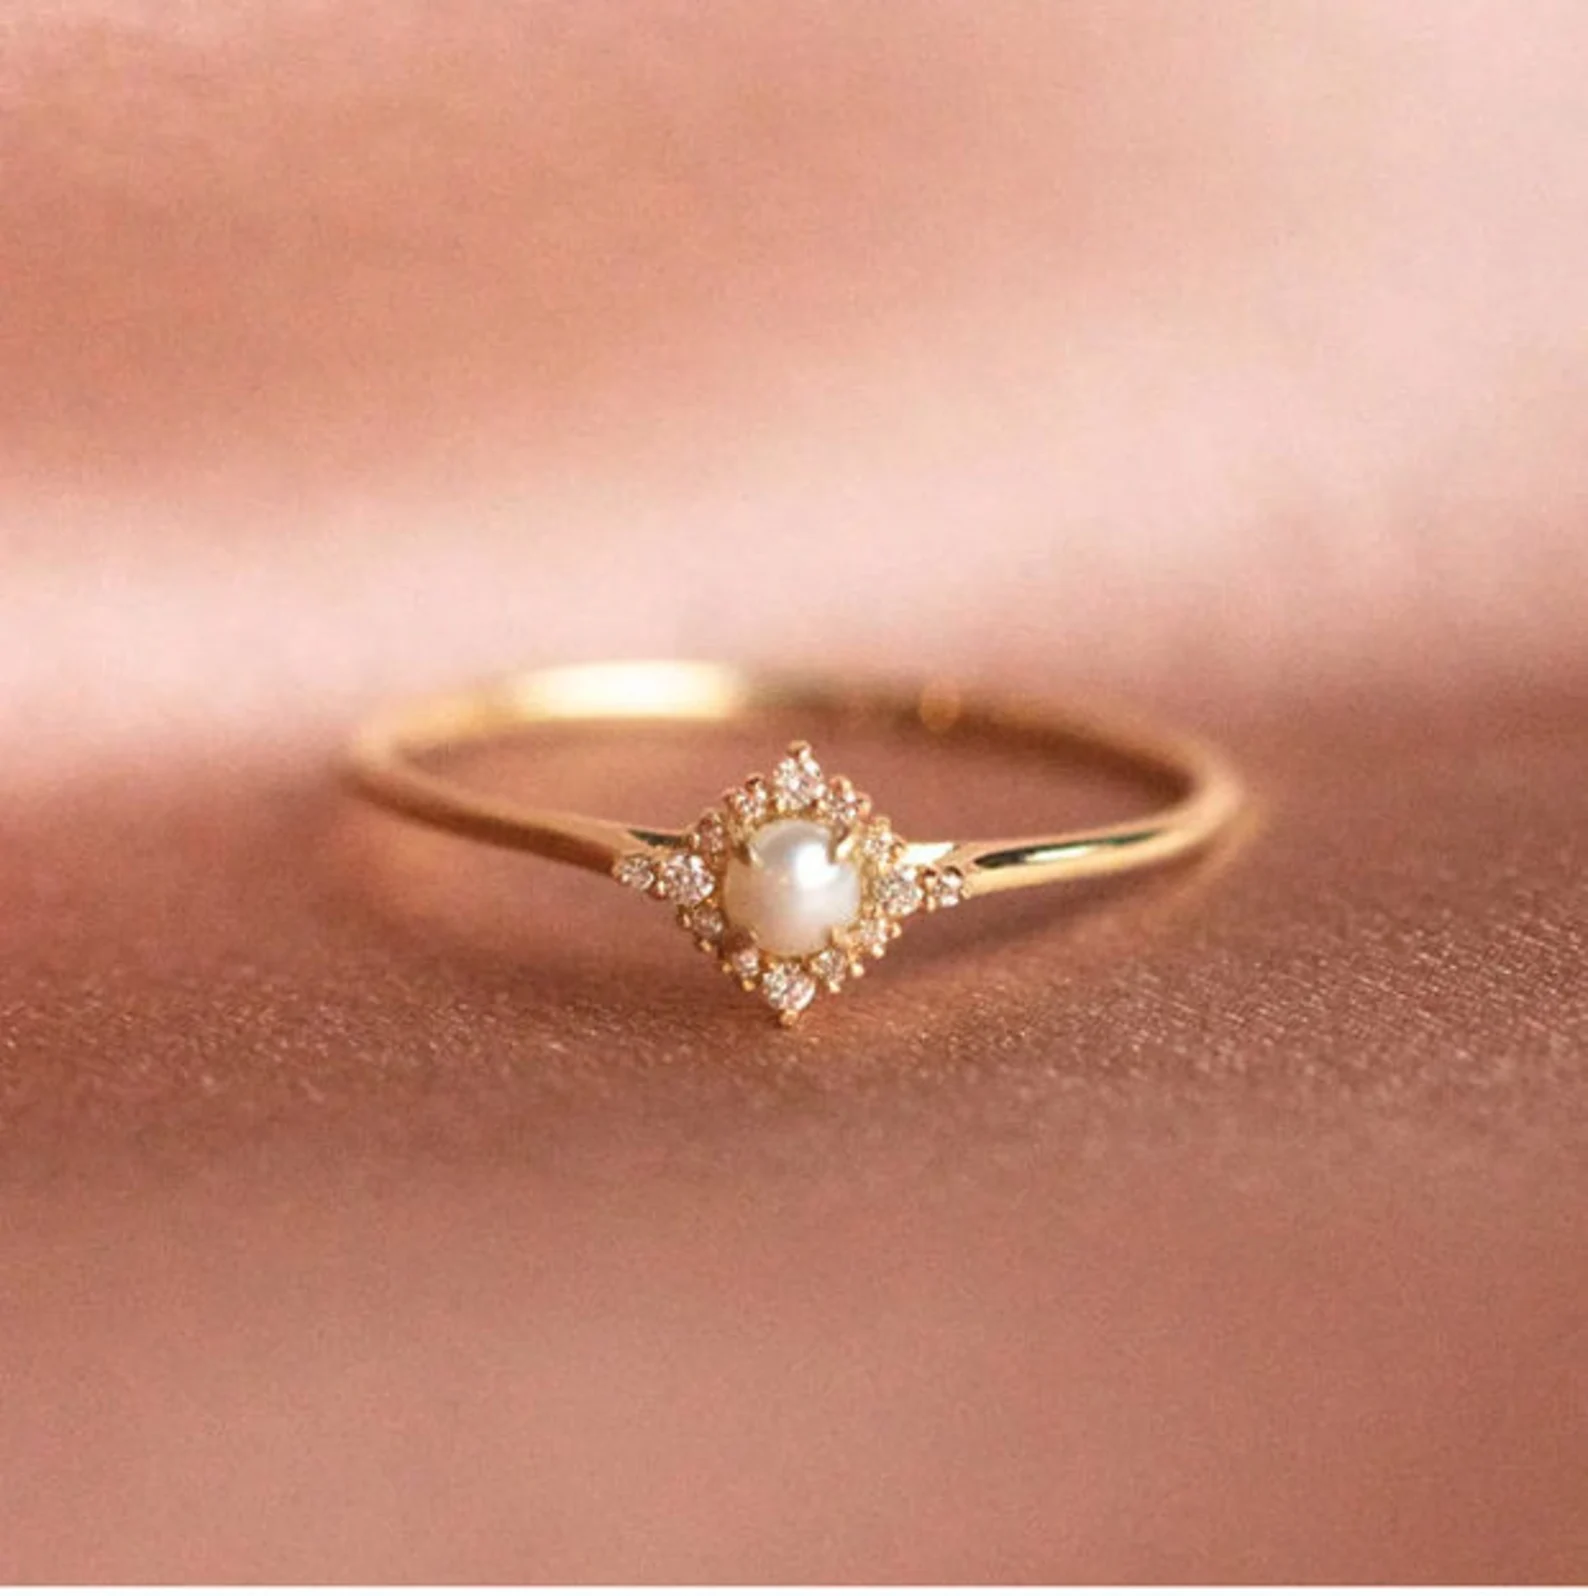 Why fashion stucks to gold ring with diamond